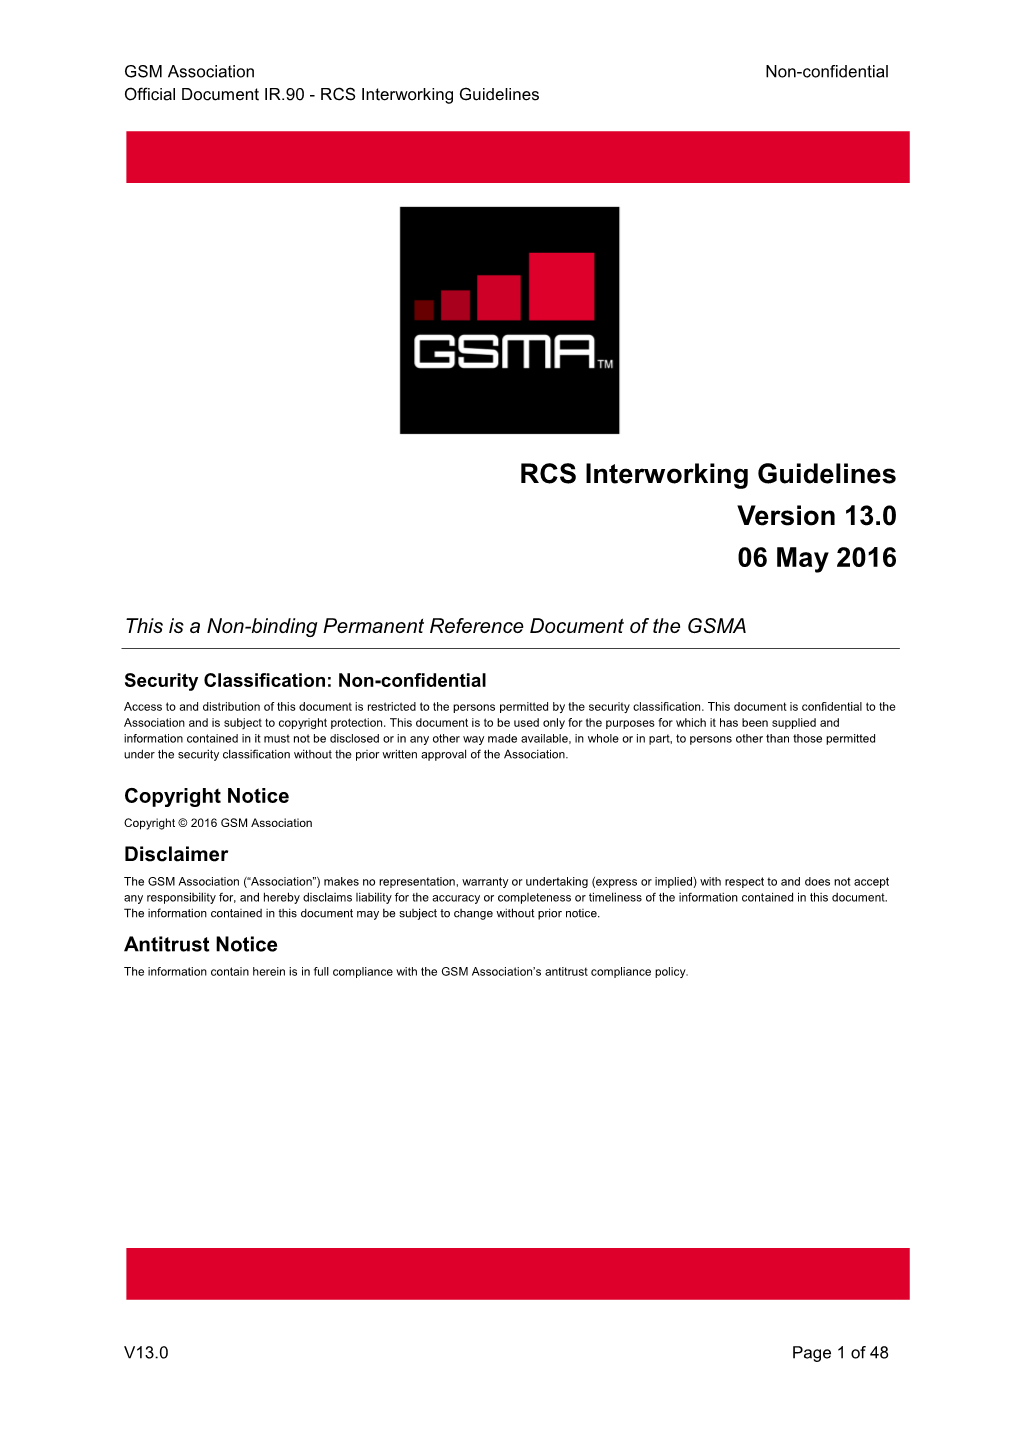 RCS Interworking Guidelines Version 13.0 06 May 2016